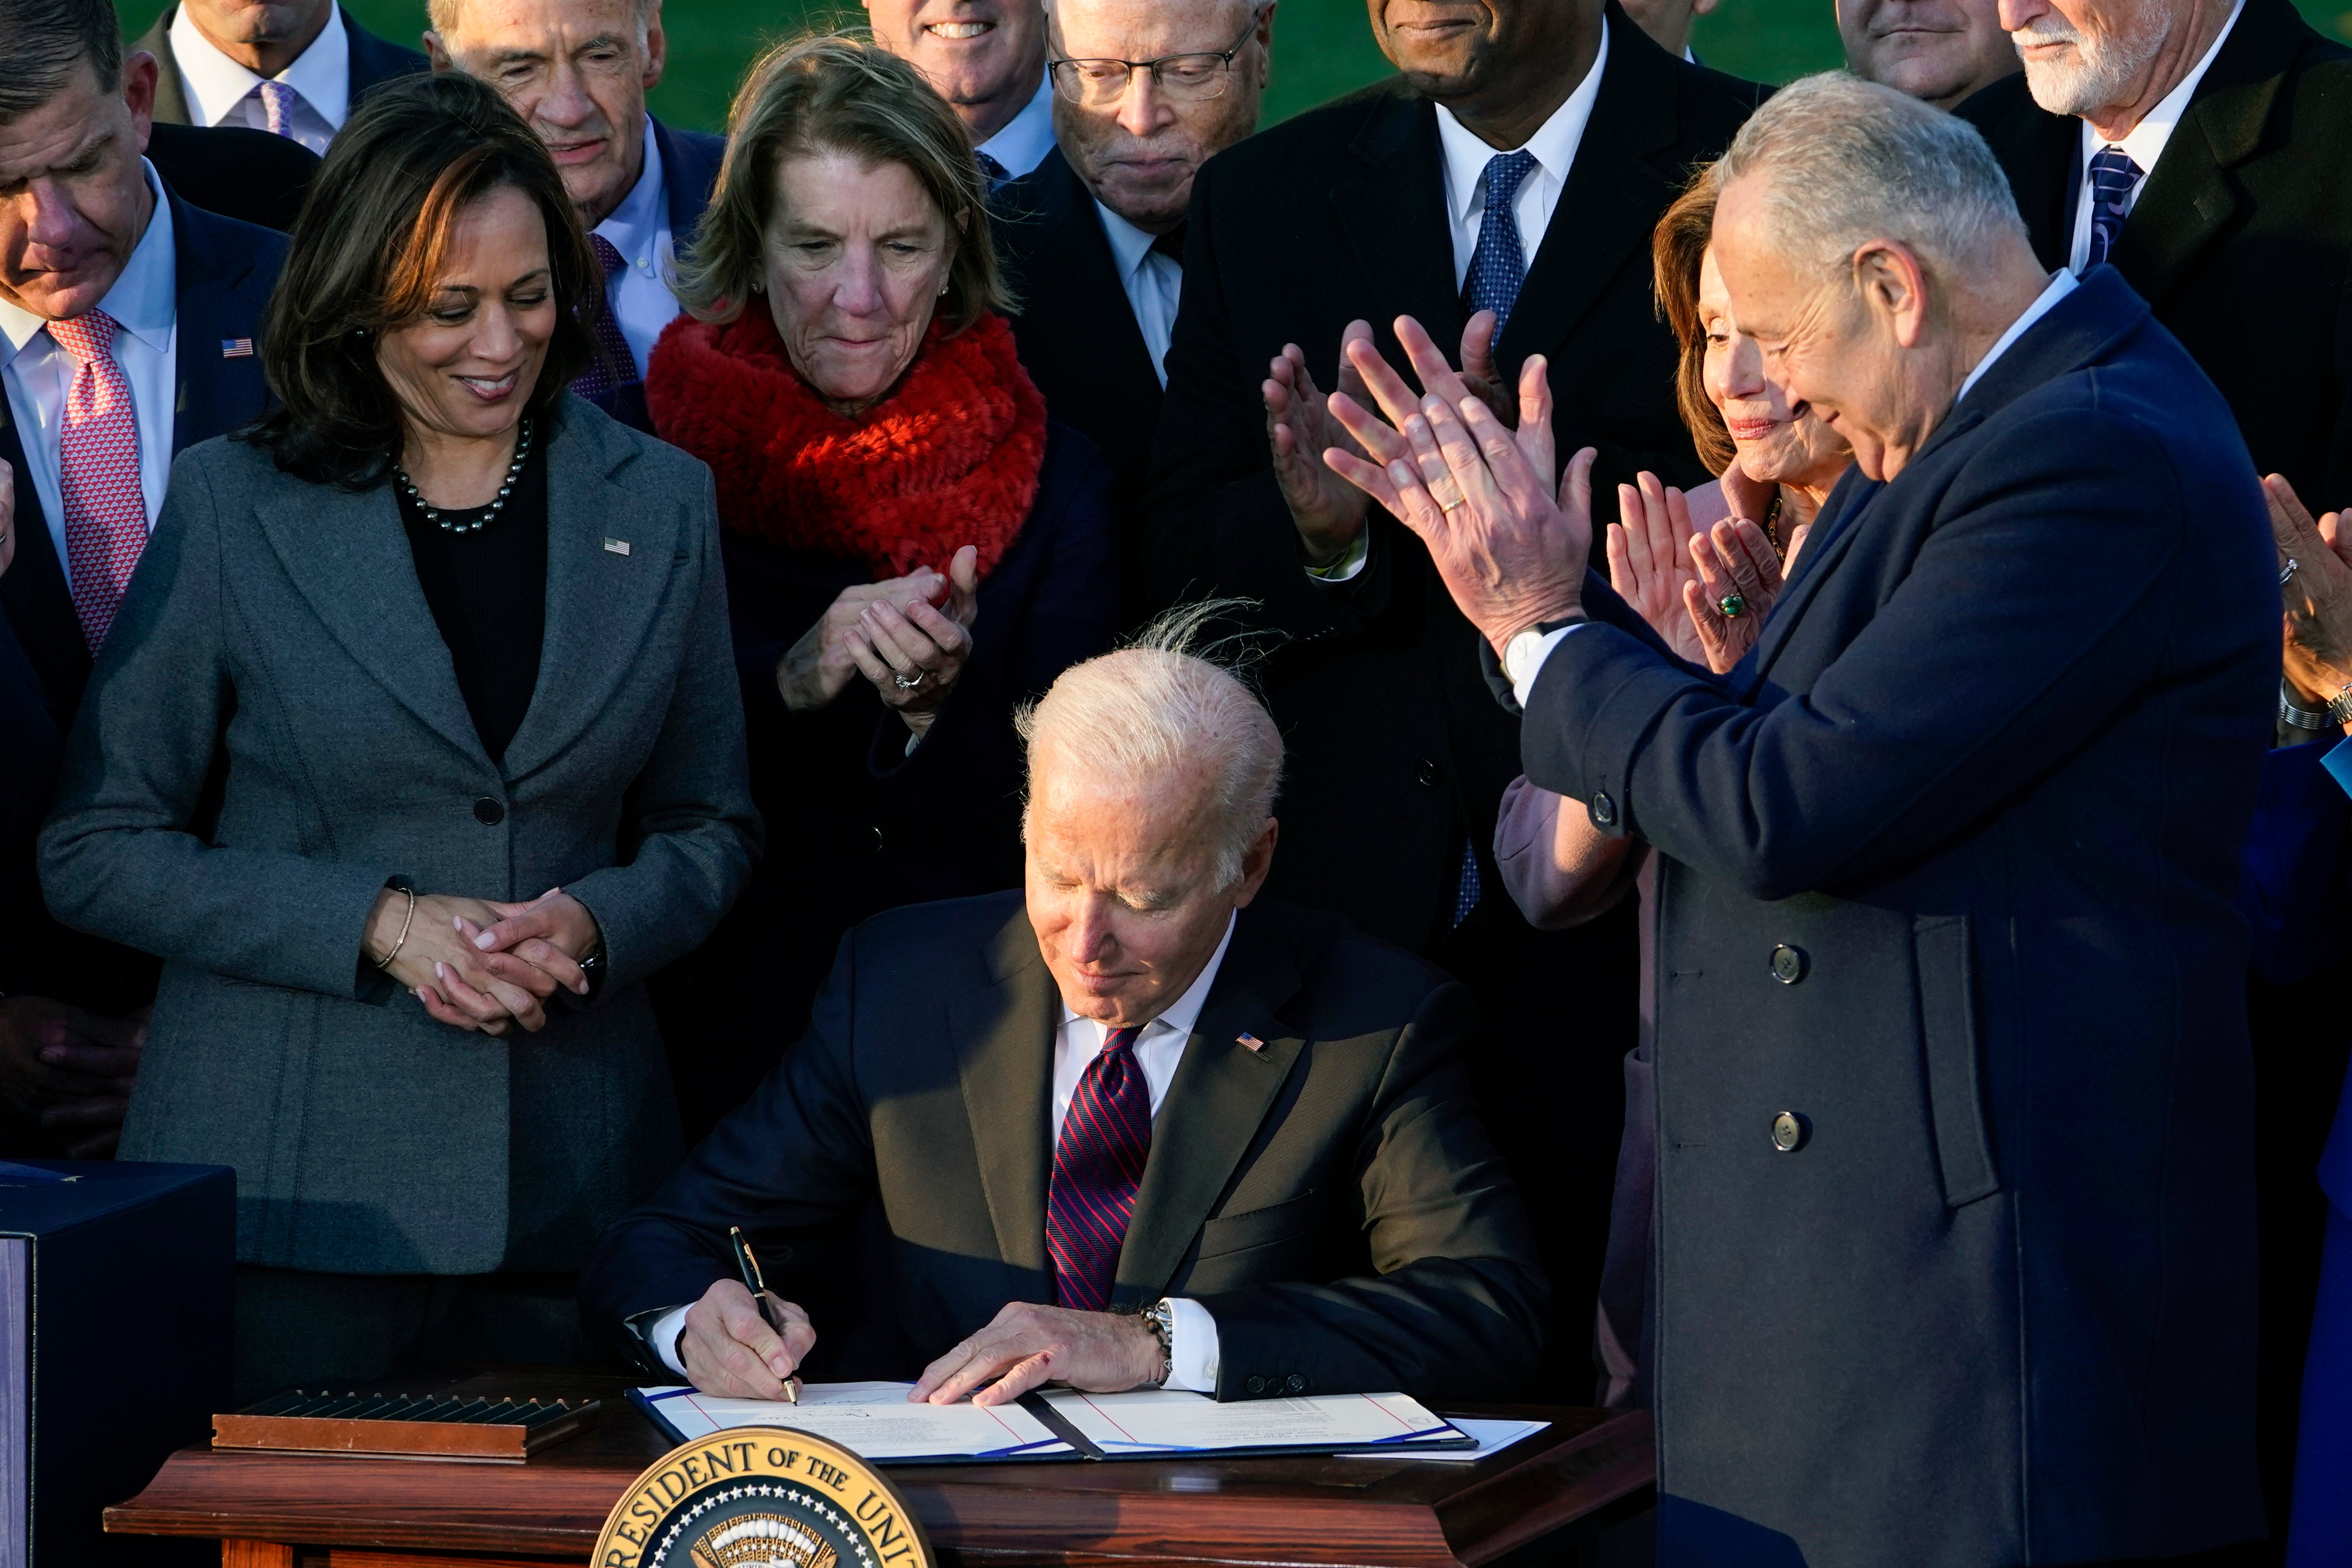 President Joe Biden signs the $1.2 trillion bipartisan infrastructure bill into law during a ceremony on the South Lawn of the White House in Washington, Nov. 15, 2021